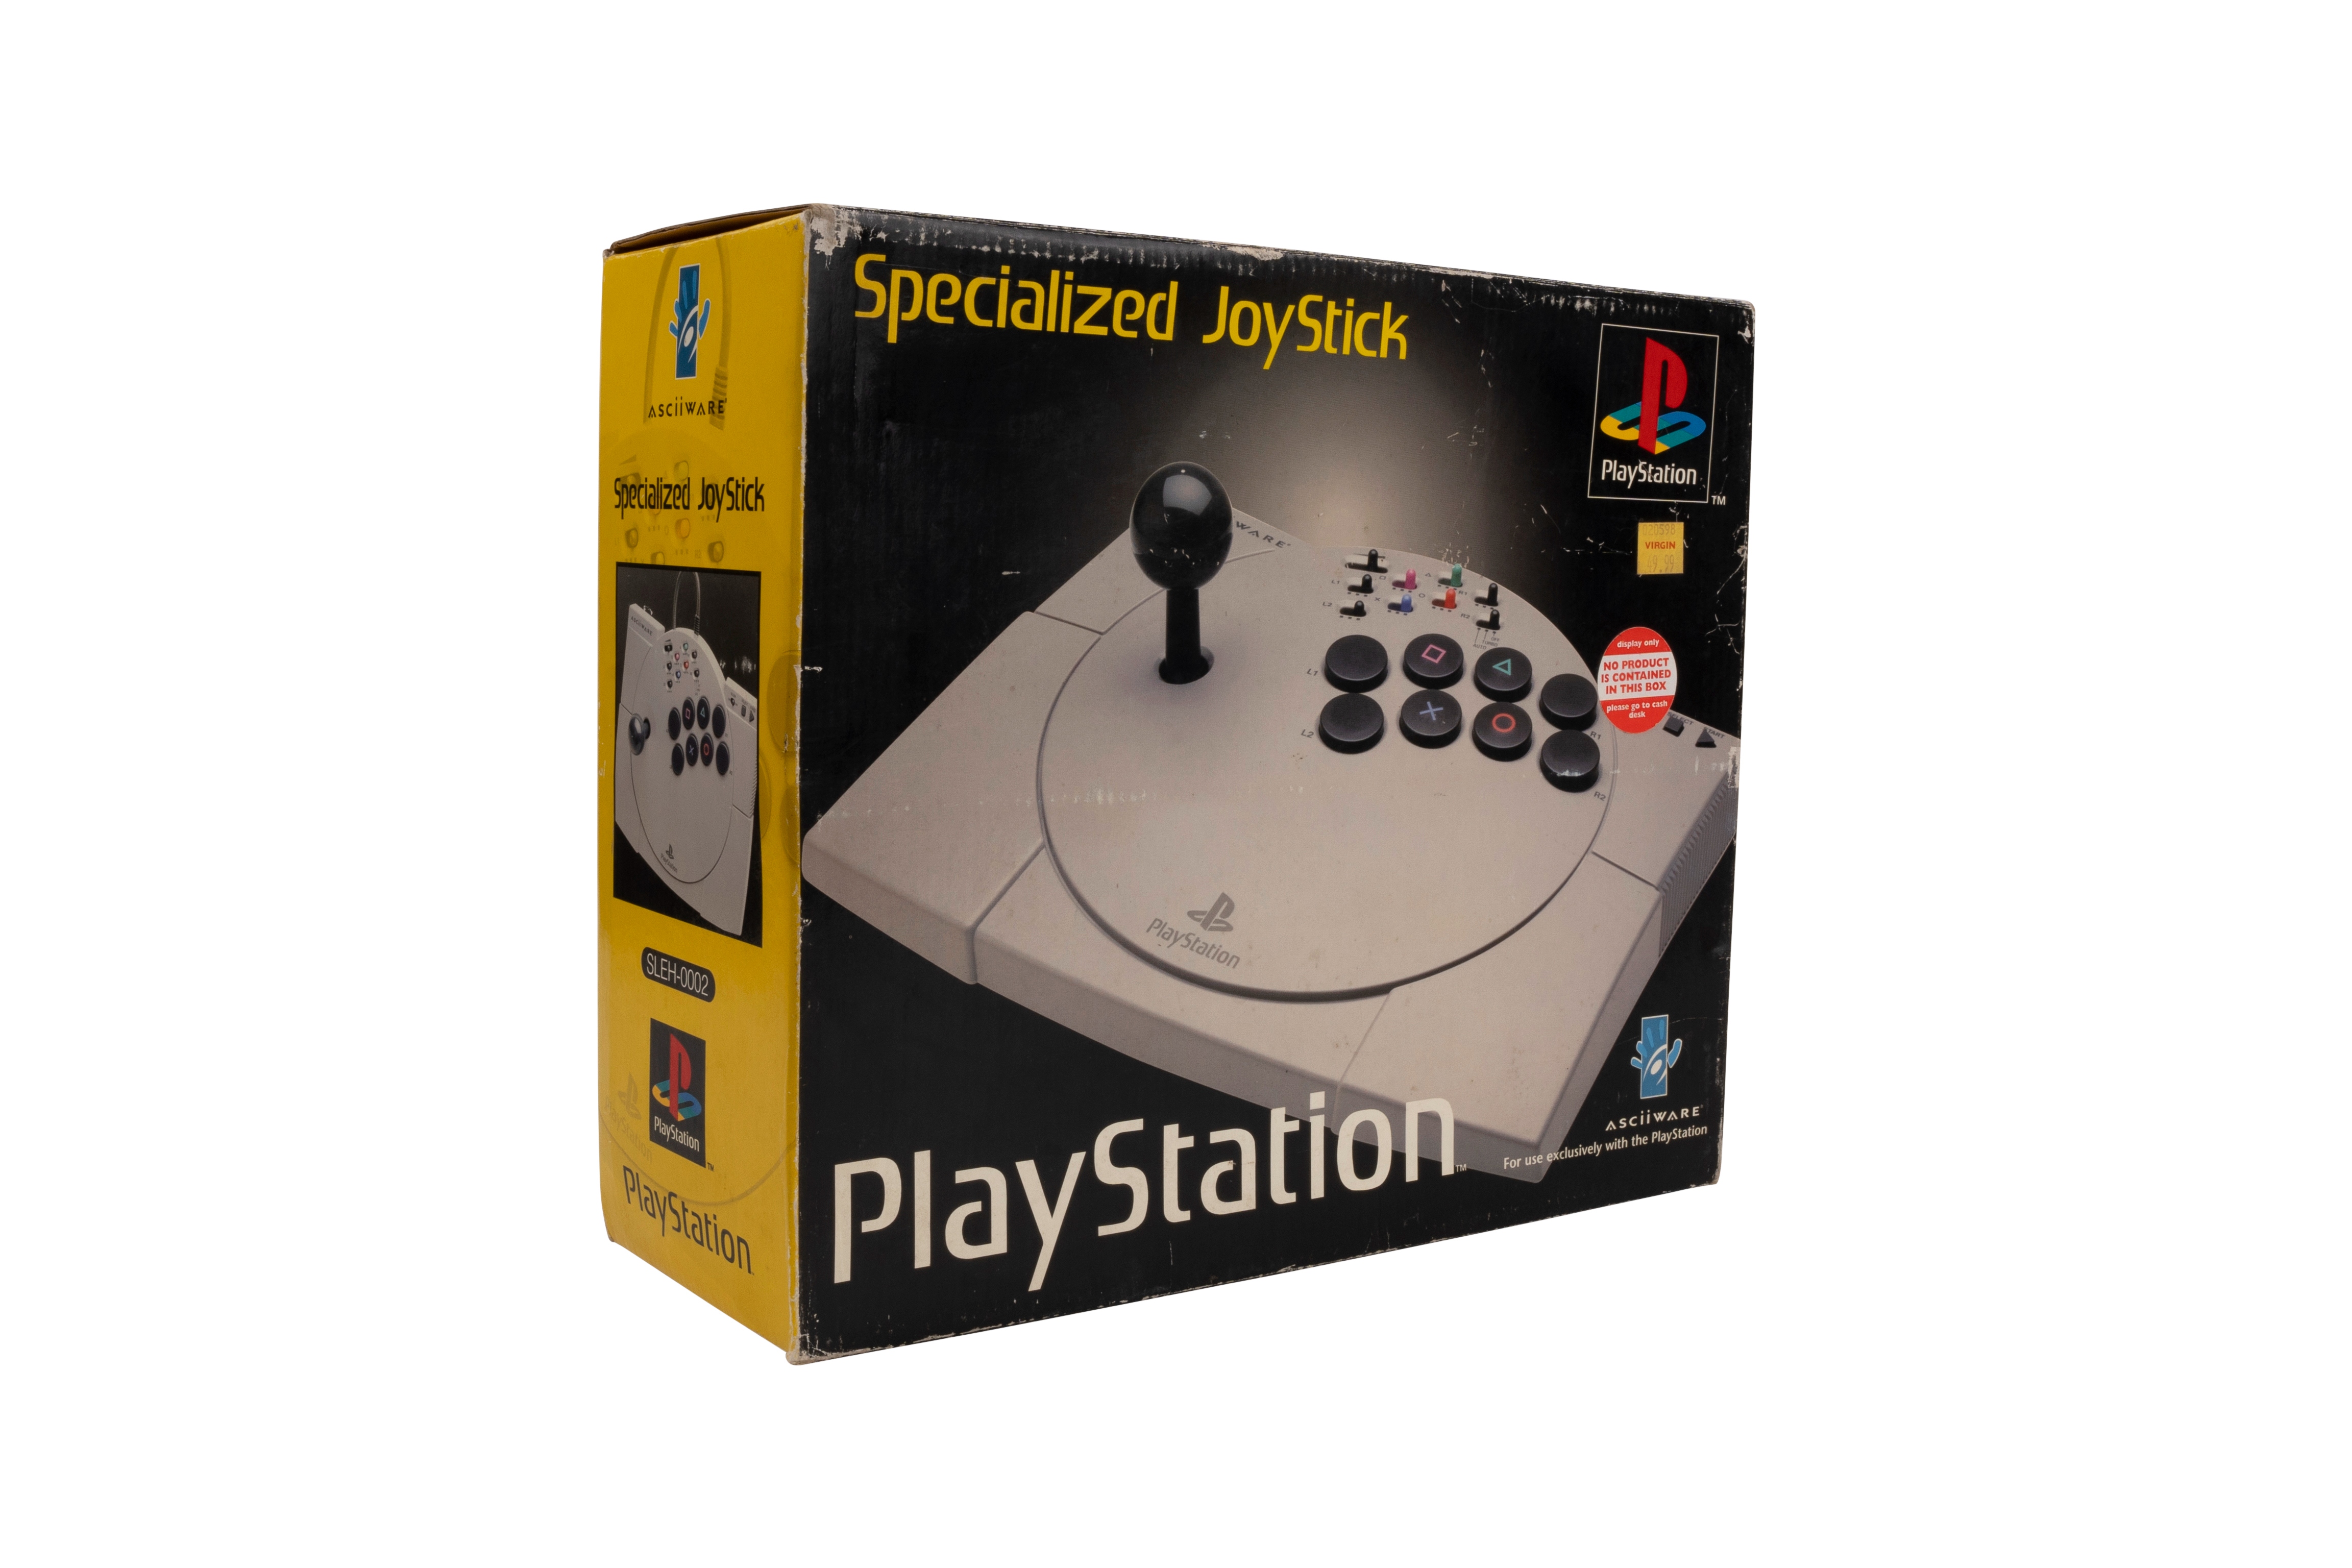 Sony - PlayStation Specialized JoyStick - Boxed/Brand New - PS1, and Sony - Gametrak Central Unit &